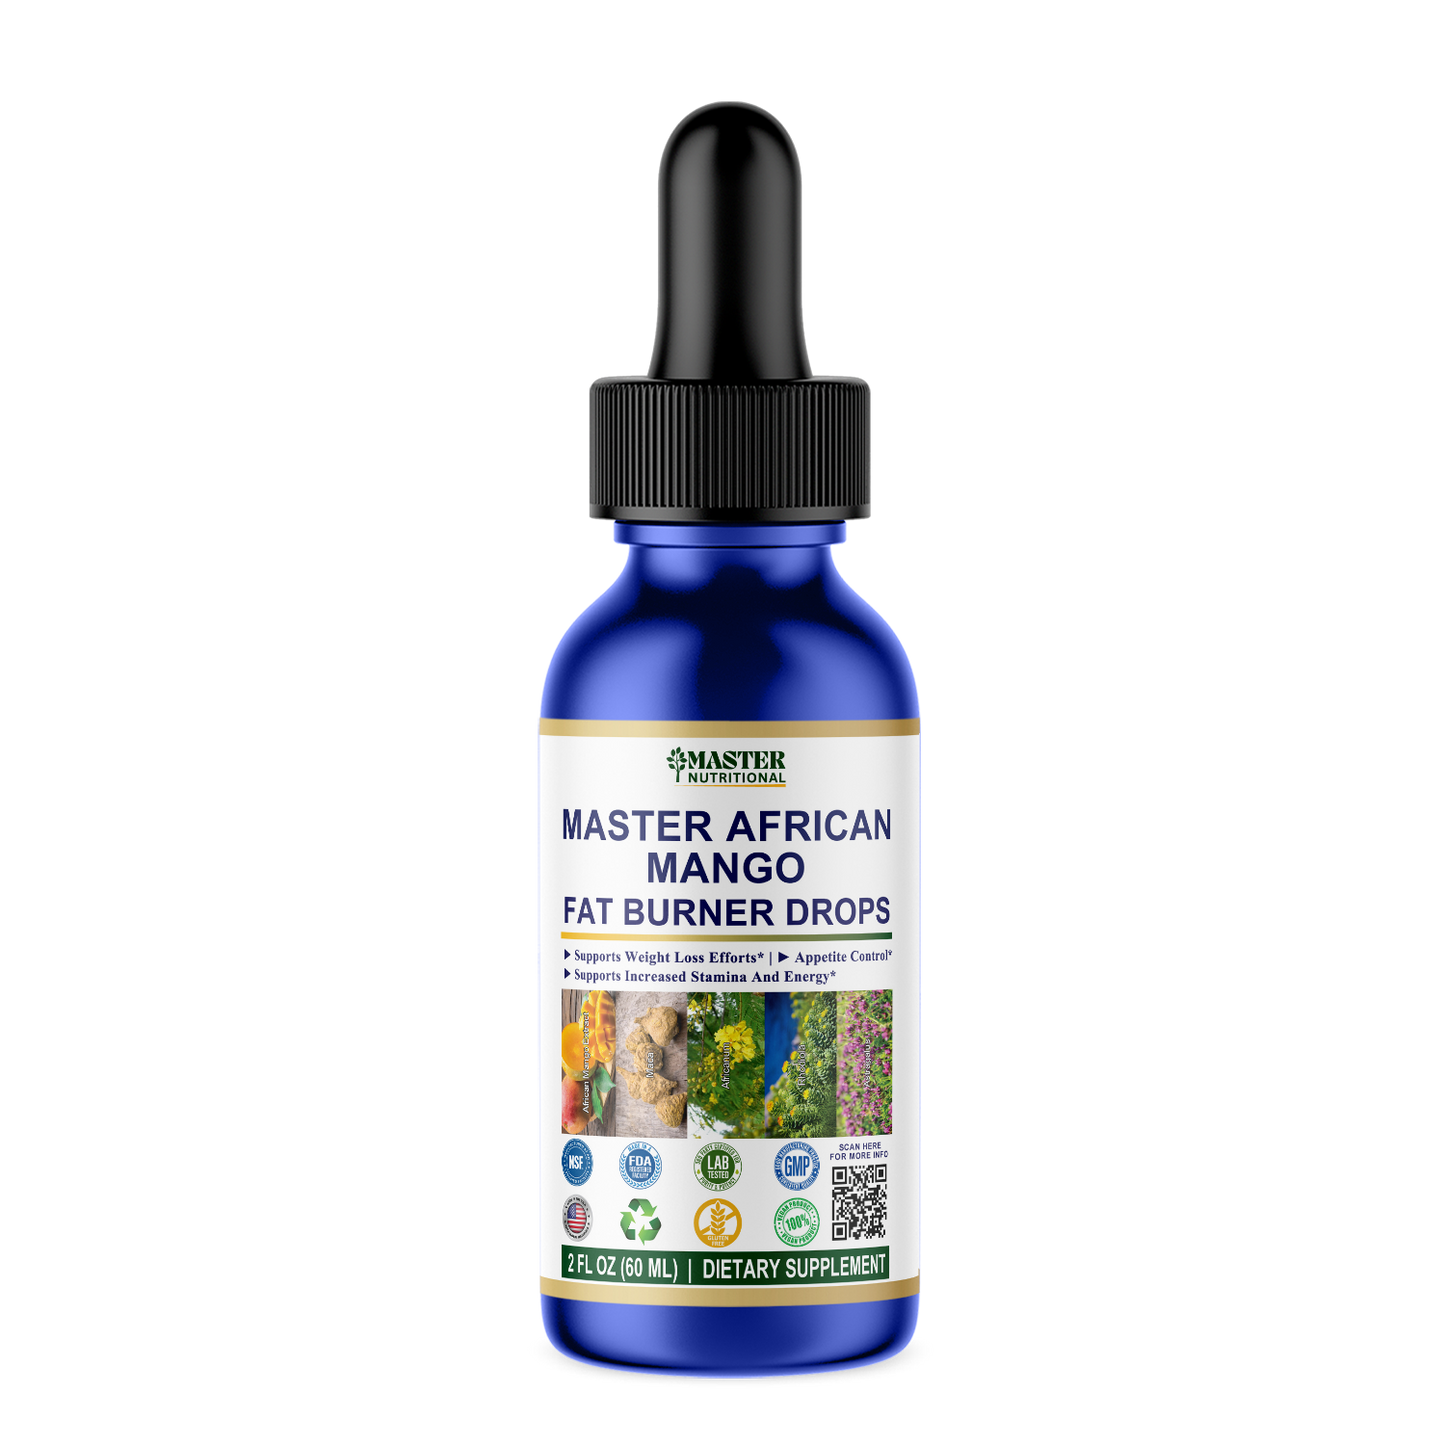 Master African Mango Fat Burner Drops: Shred Pounds Faster than Ever